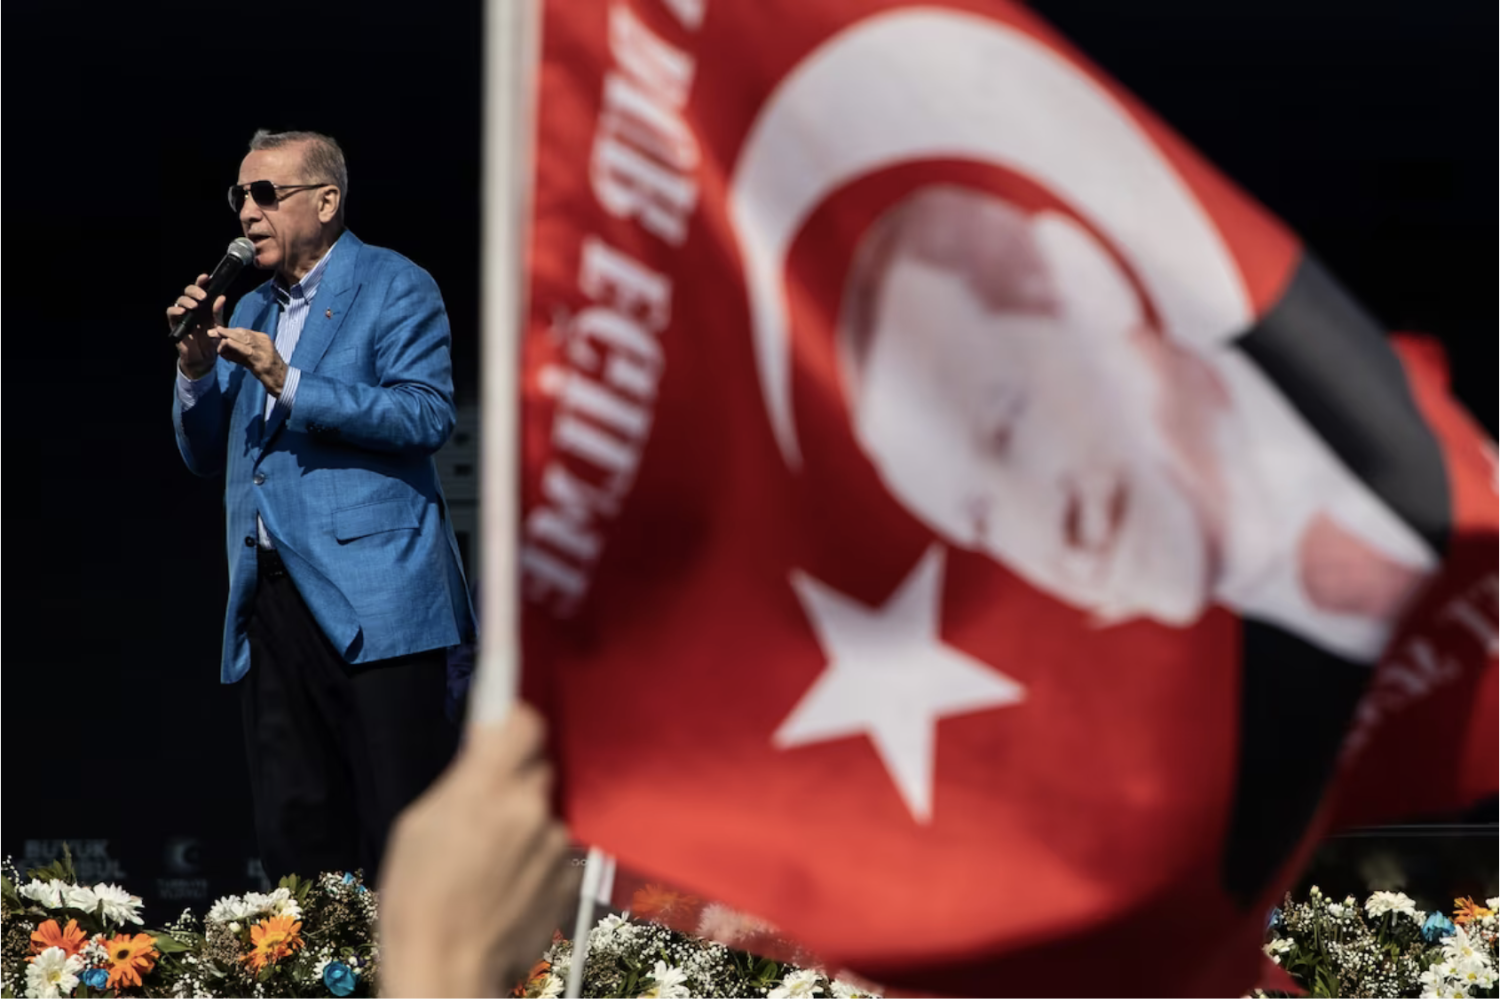 Turkey's President Recep Tayyip Erdogan speaks to supporters at a rally on May 7 in Istanbul. (Burak Kara/Getty Images)